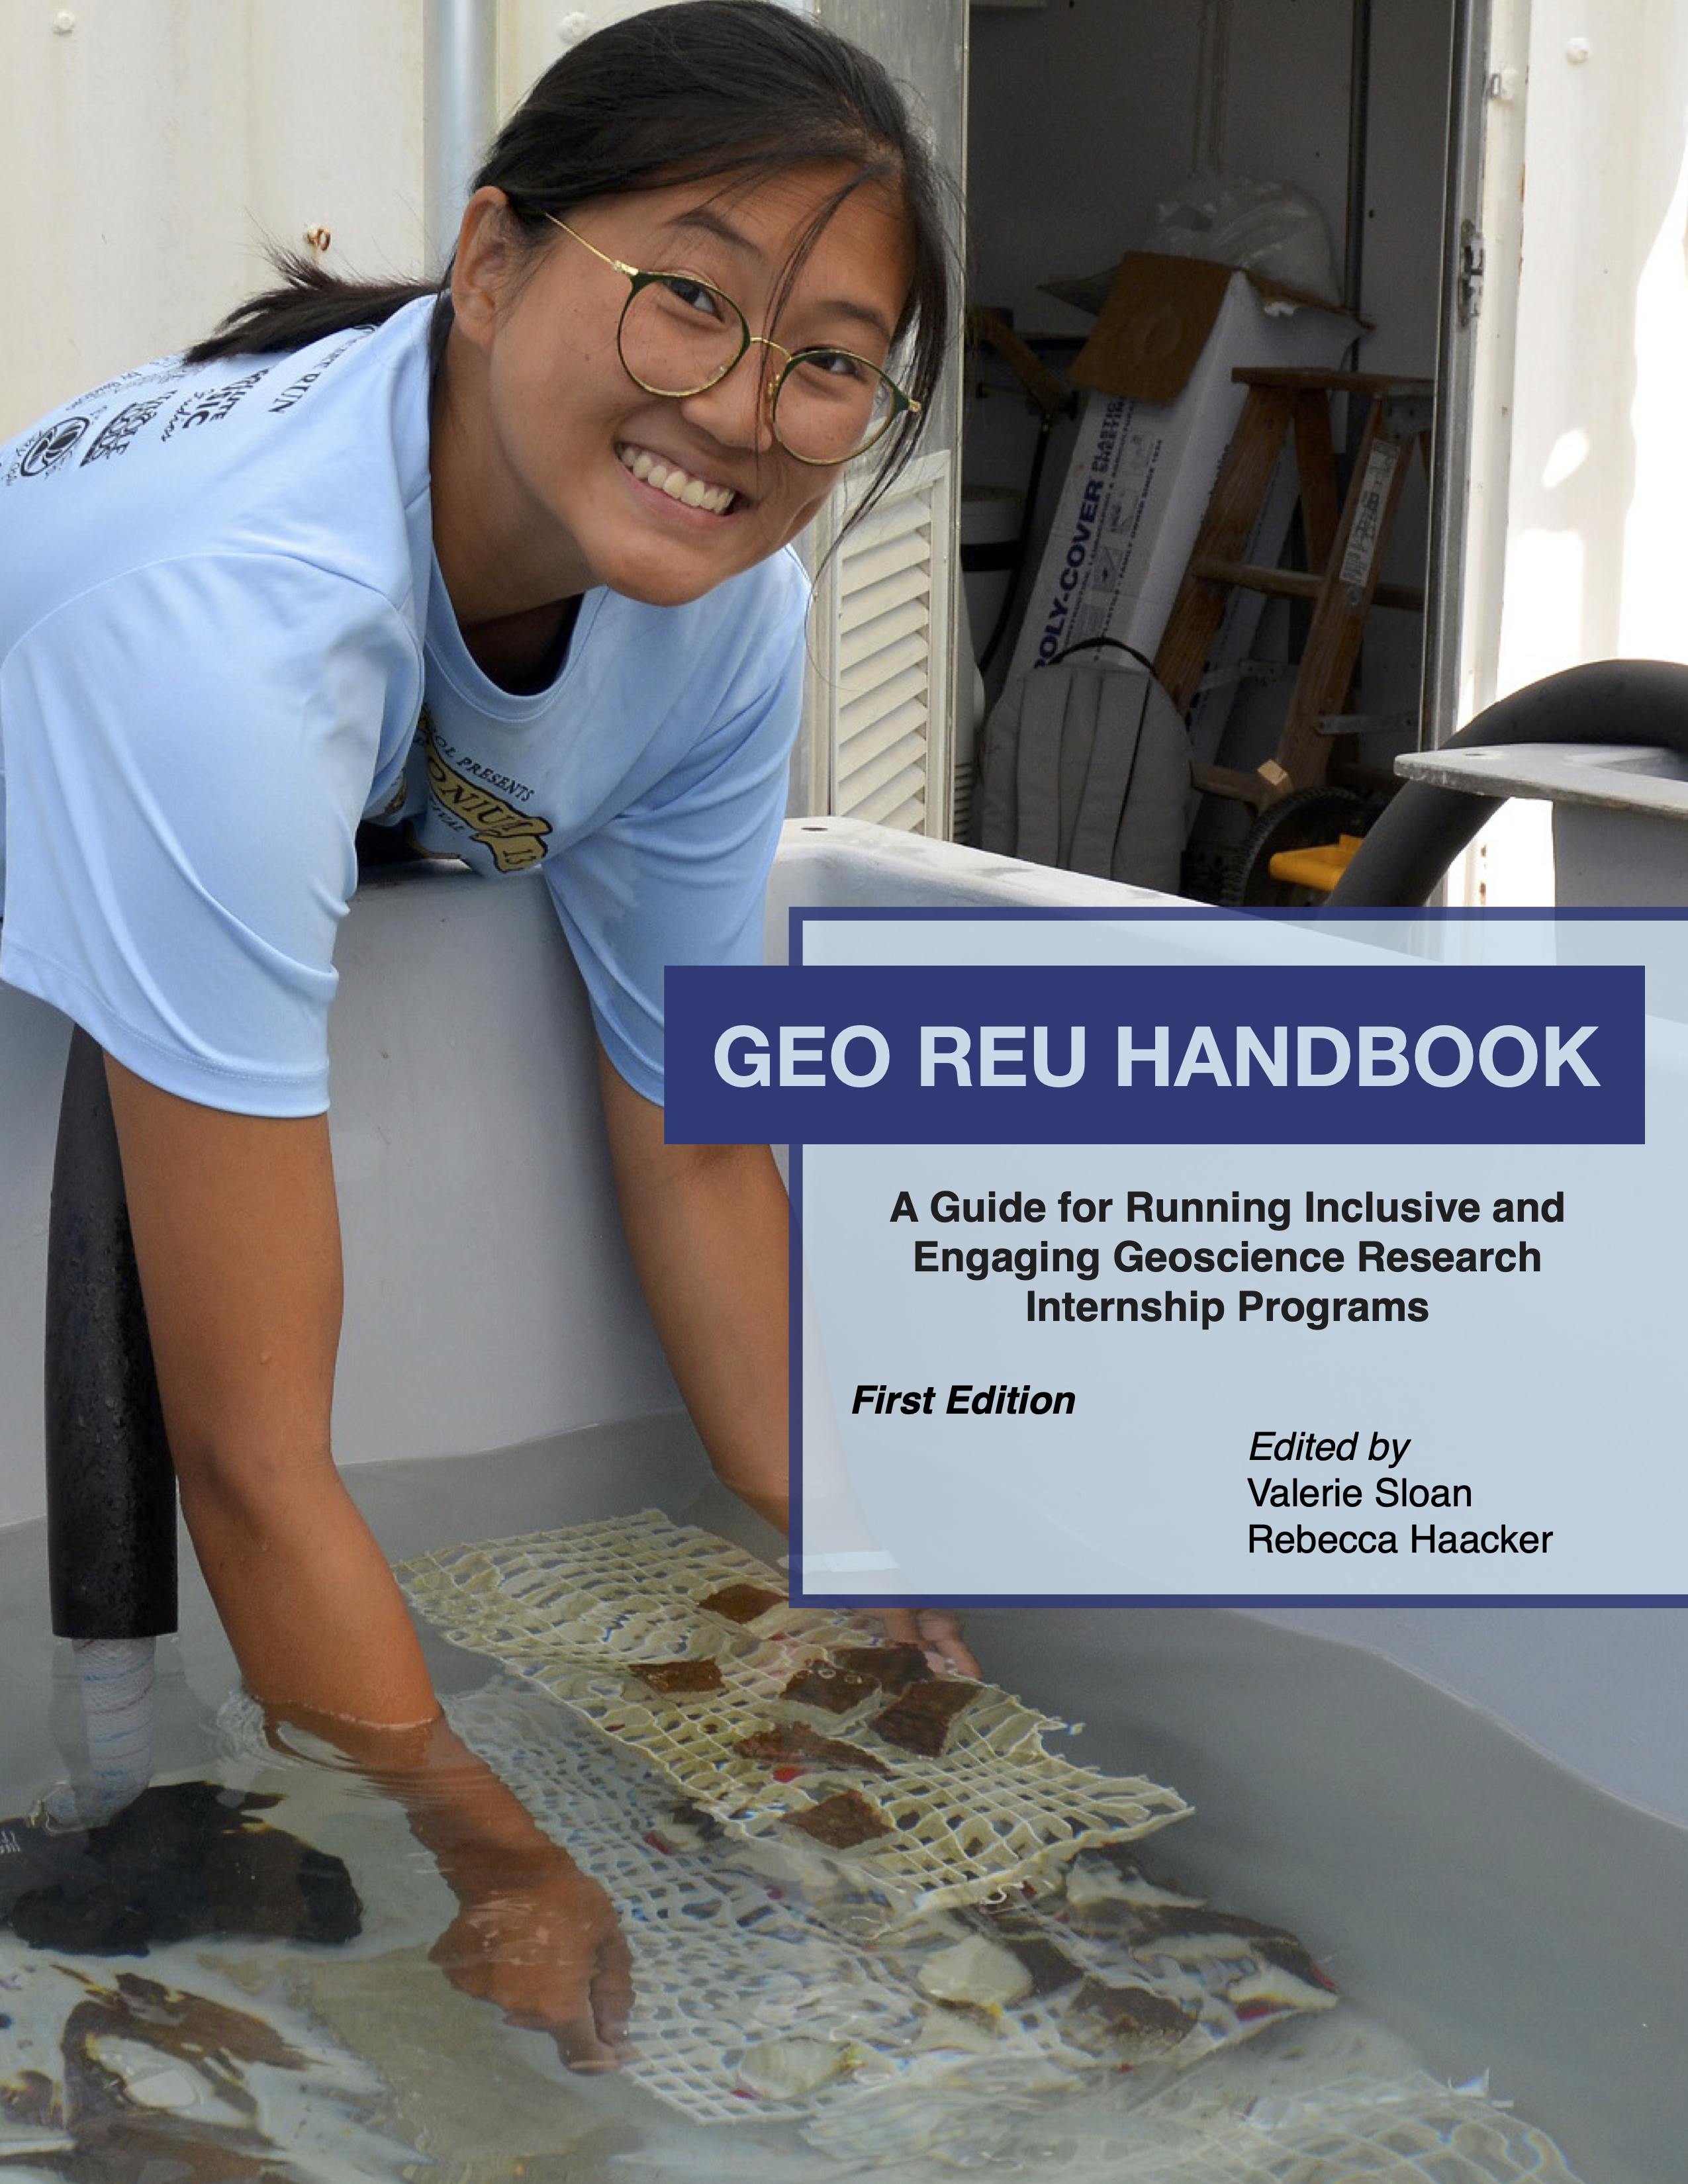 GEO REU Handbook cover: A student leans over a tub of water holding a tray of samples in the water